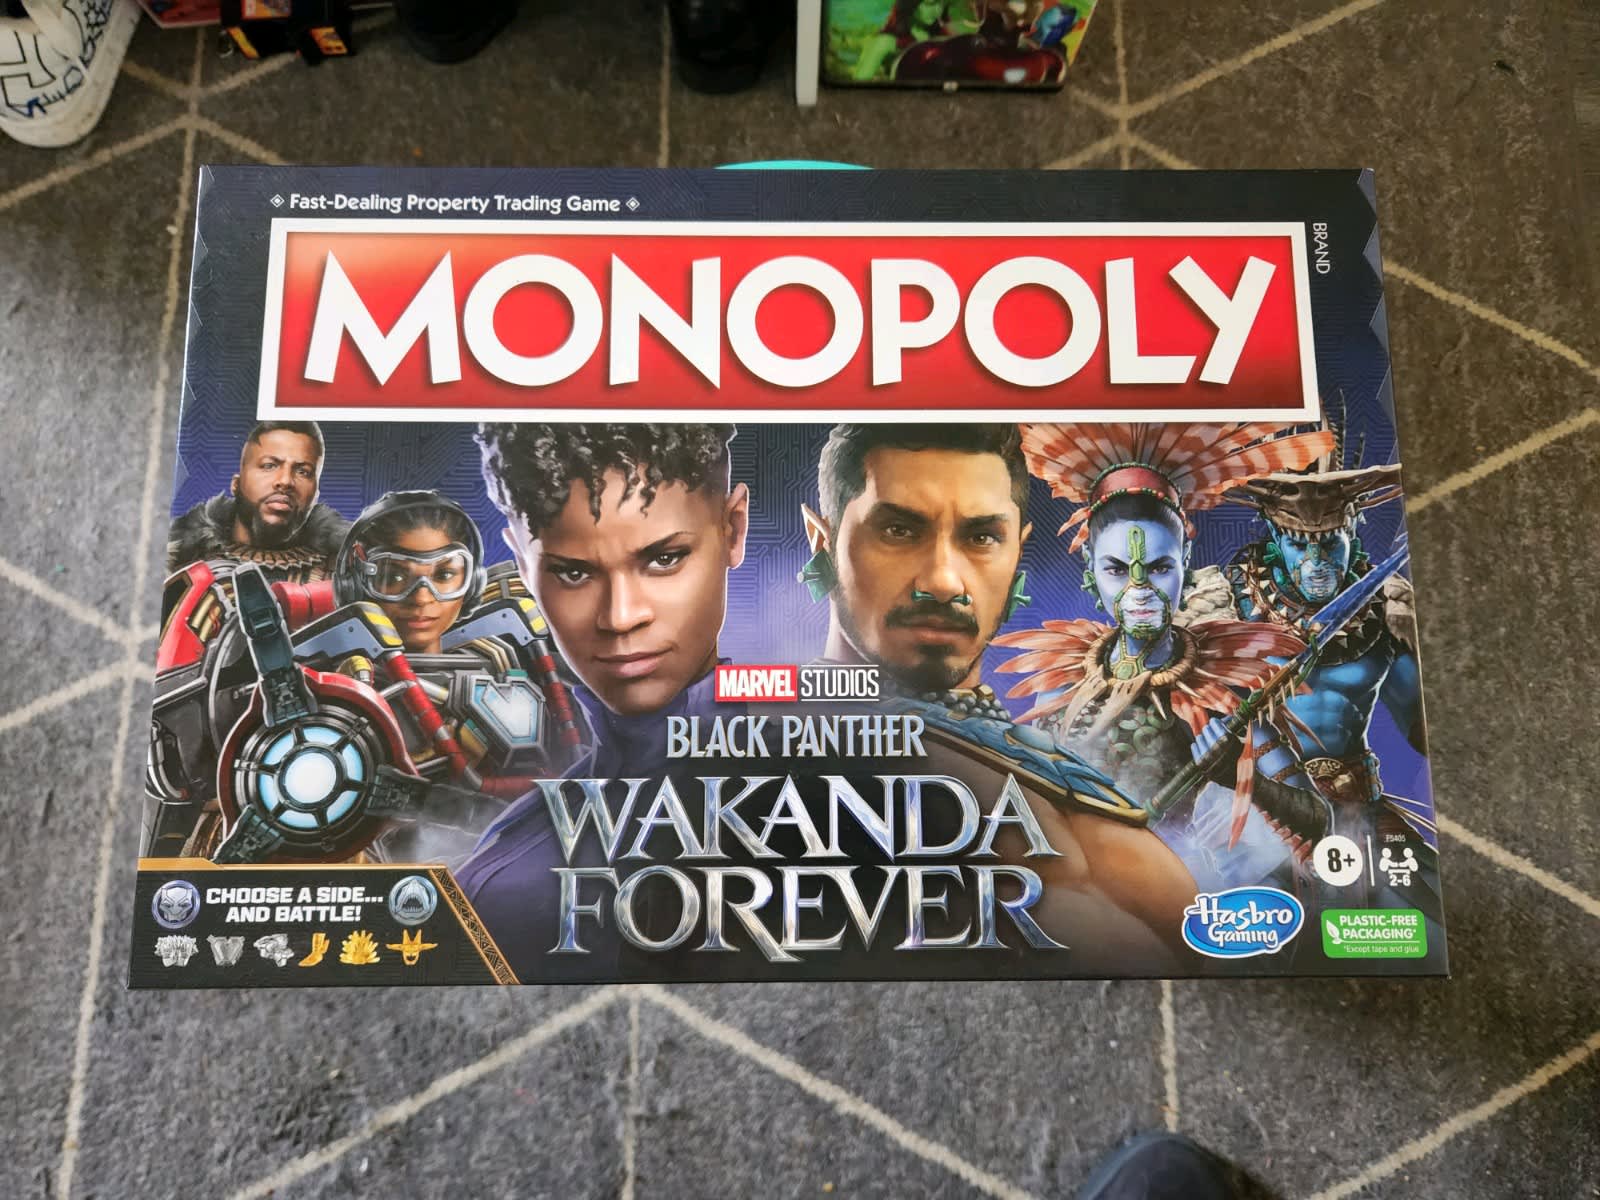 Monopoly, Scrabble, Crossword Challenge and Chess $50 or $15 Each, Board  Games, Gumtree Australia Joondalup Area - Mullaloo